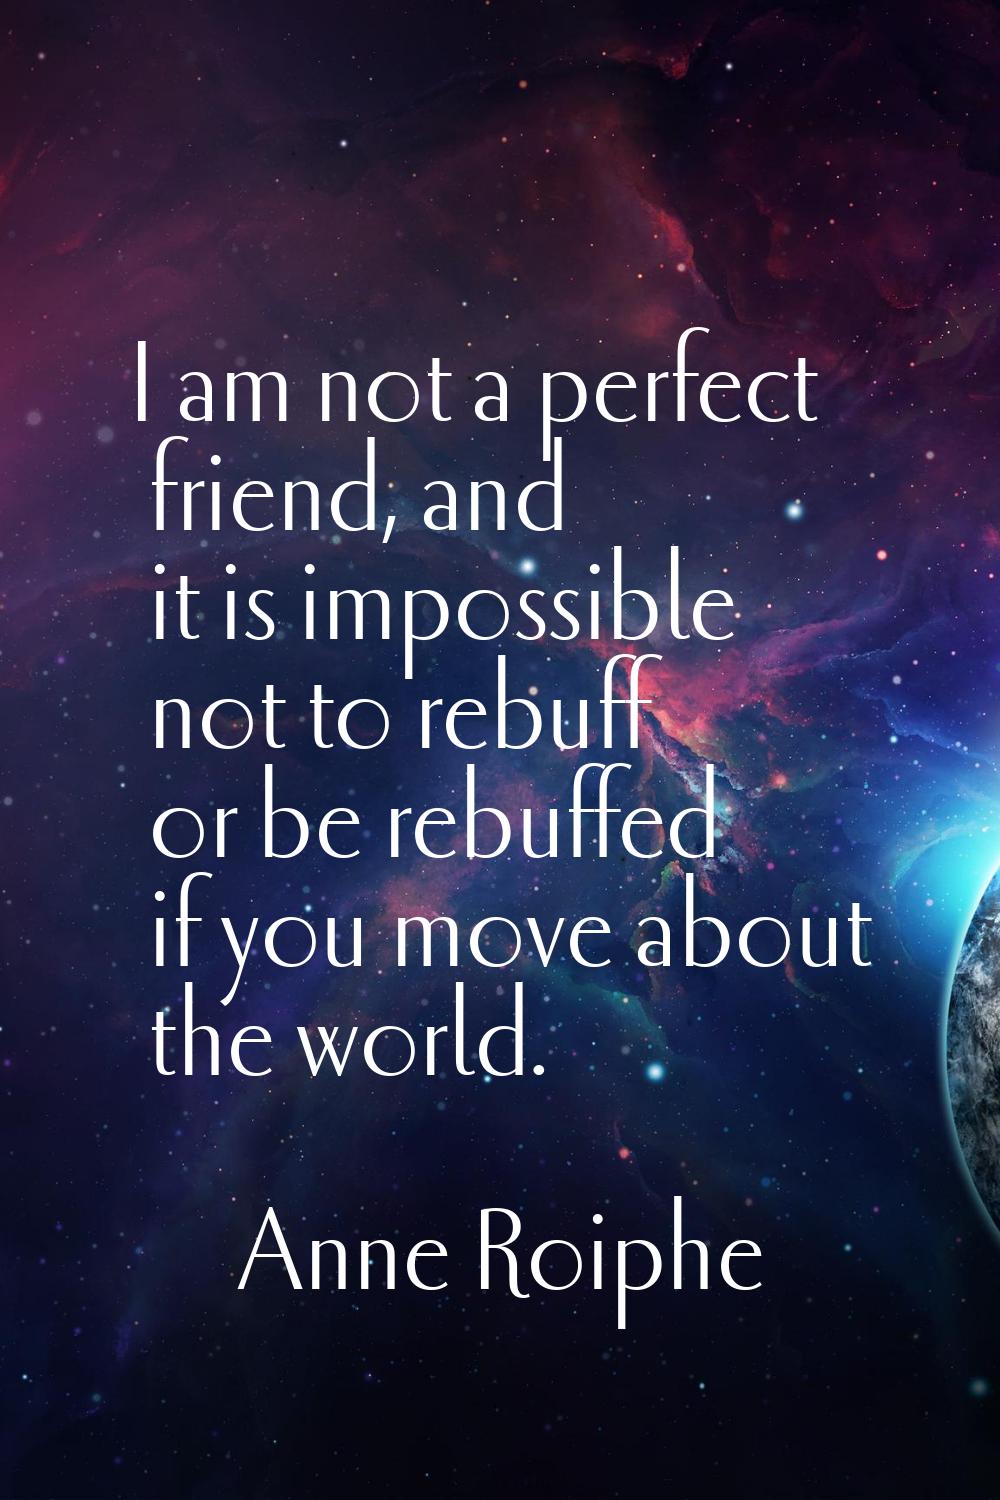 I am not a perfect friend, and it is impossible not to rebuff or be rebuffed if you move about the 